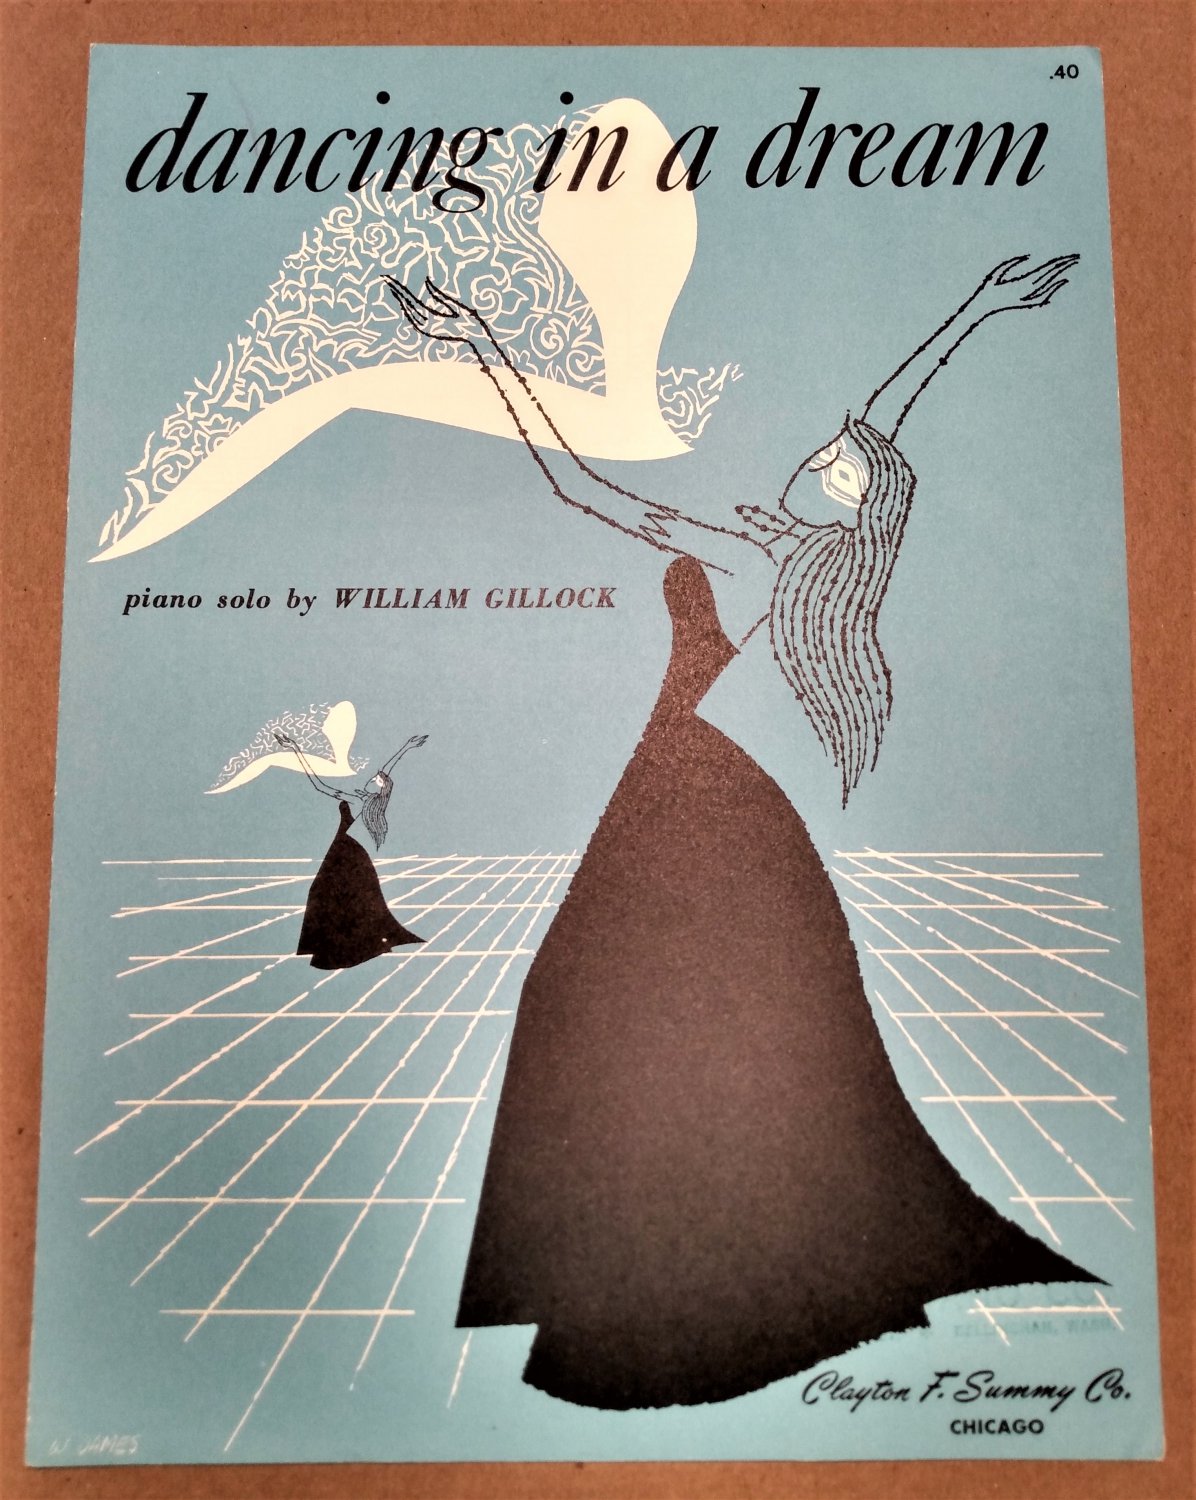 DANCING IN A DREAM Piano Solo Sheet Music by William Gillock Â© 1955